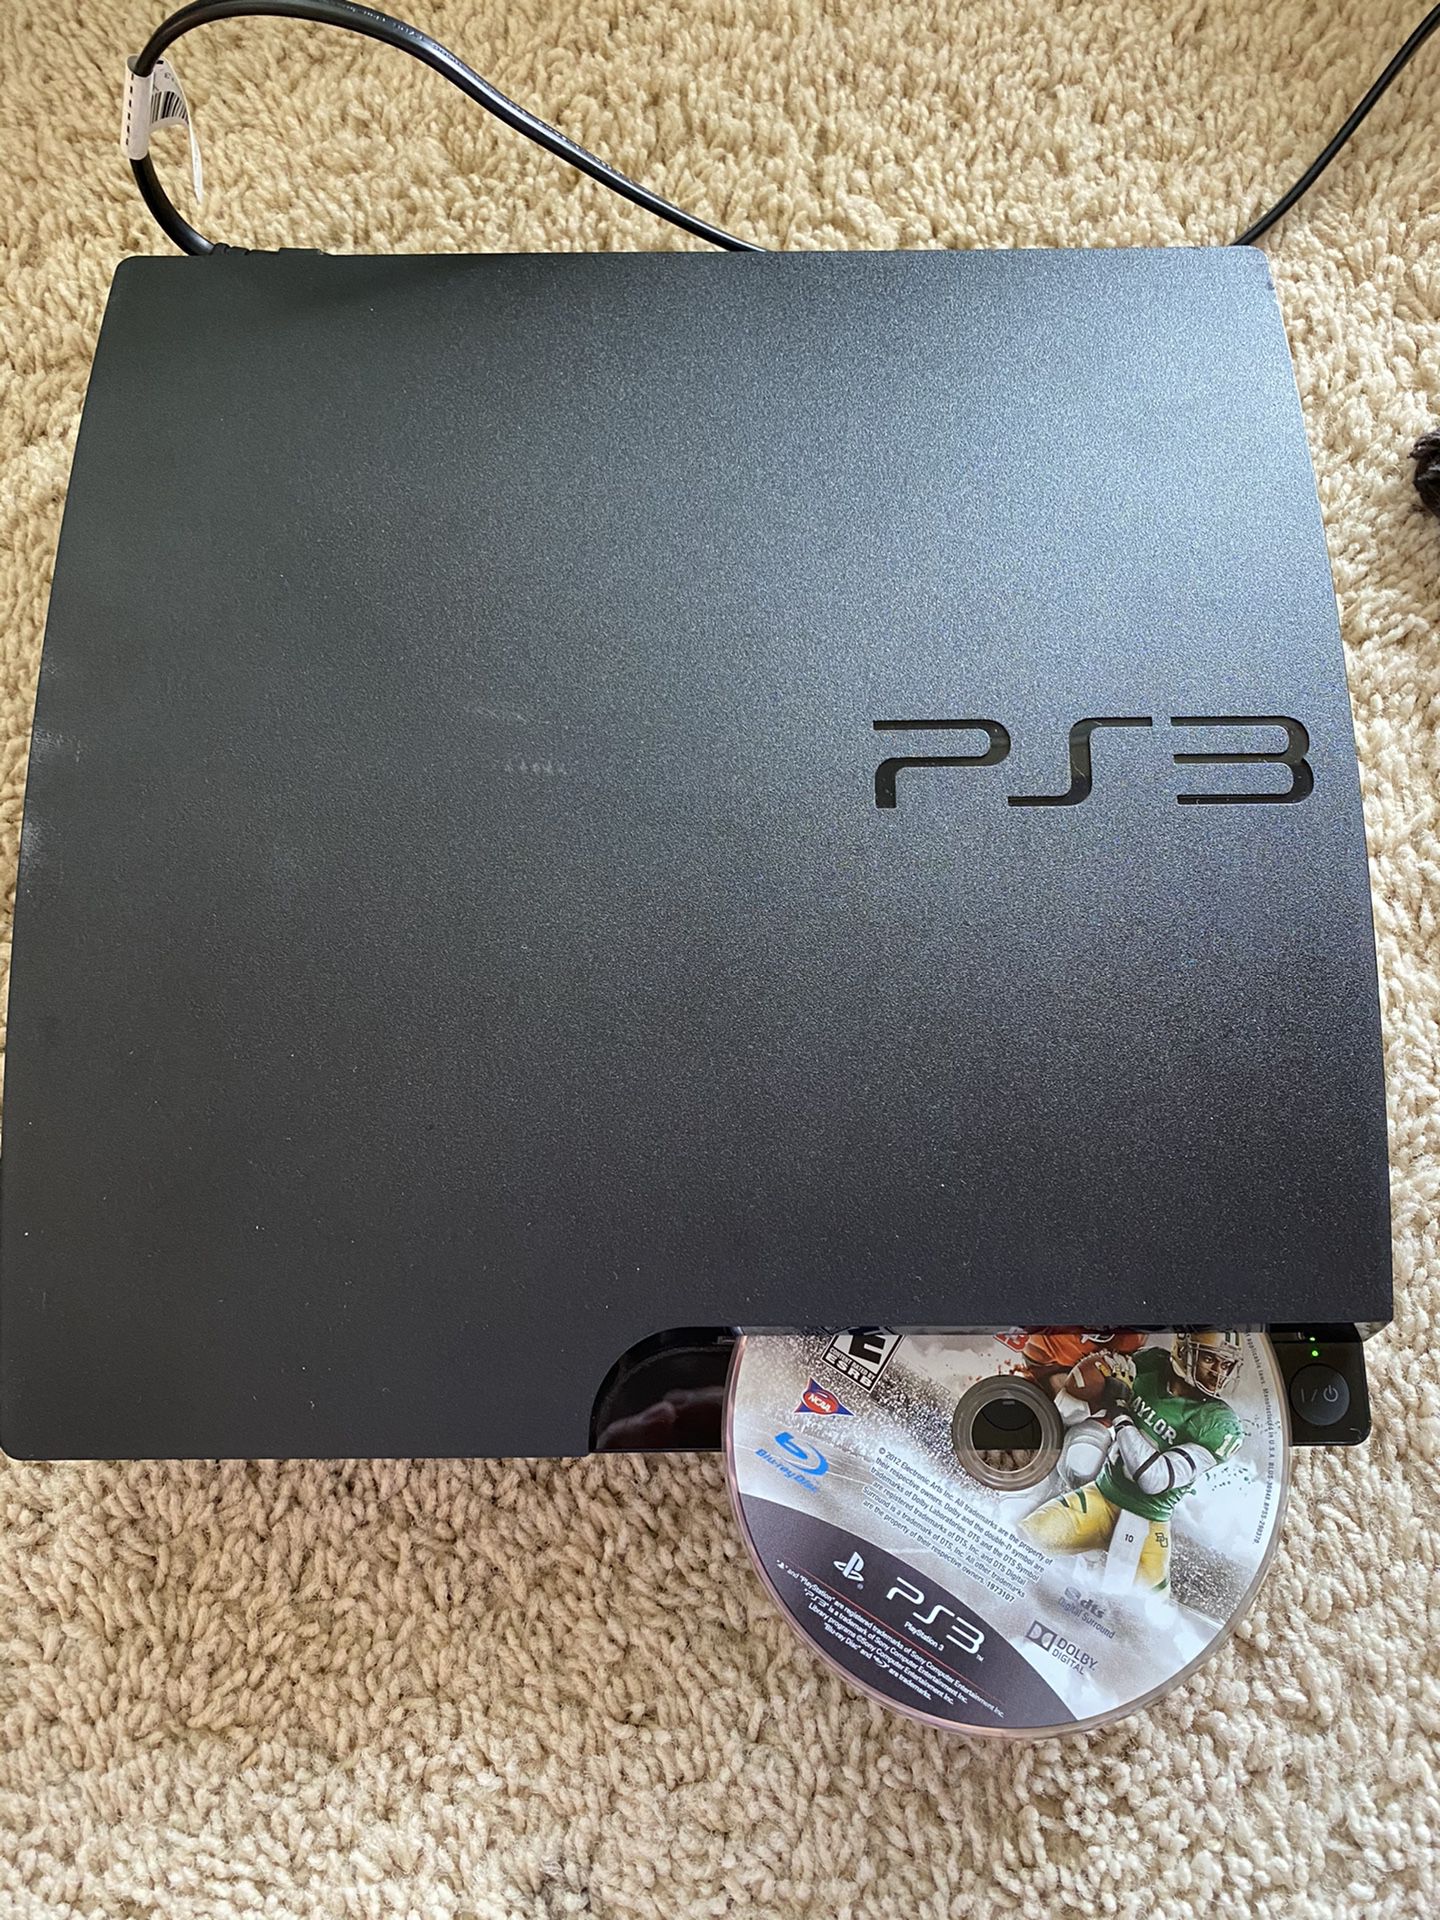 PS3 (CONSOLE ONLY)